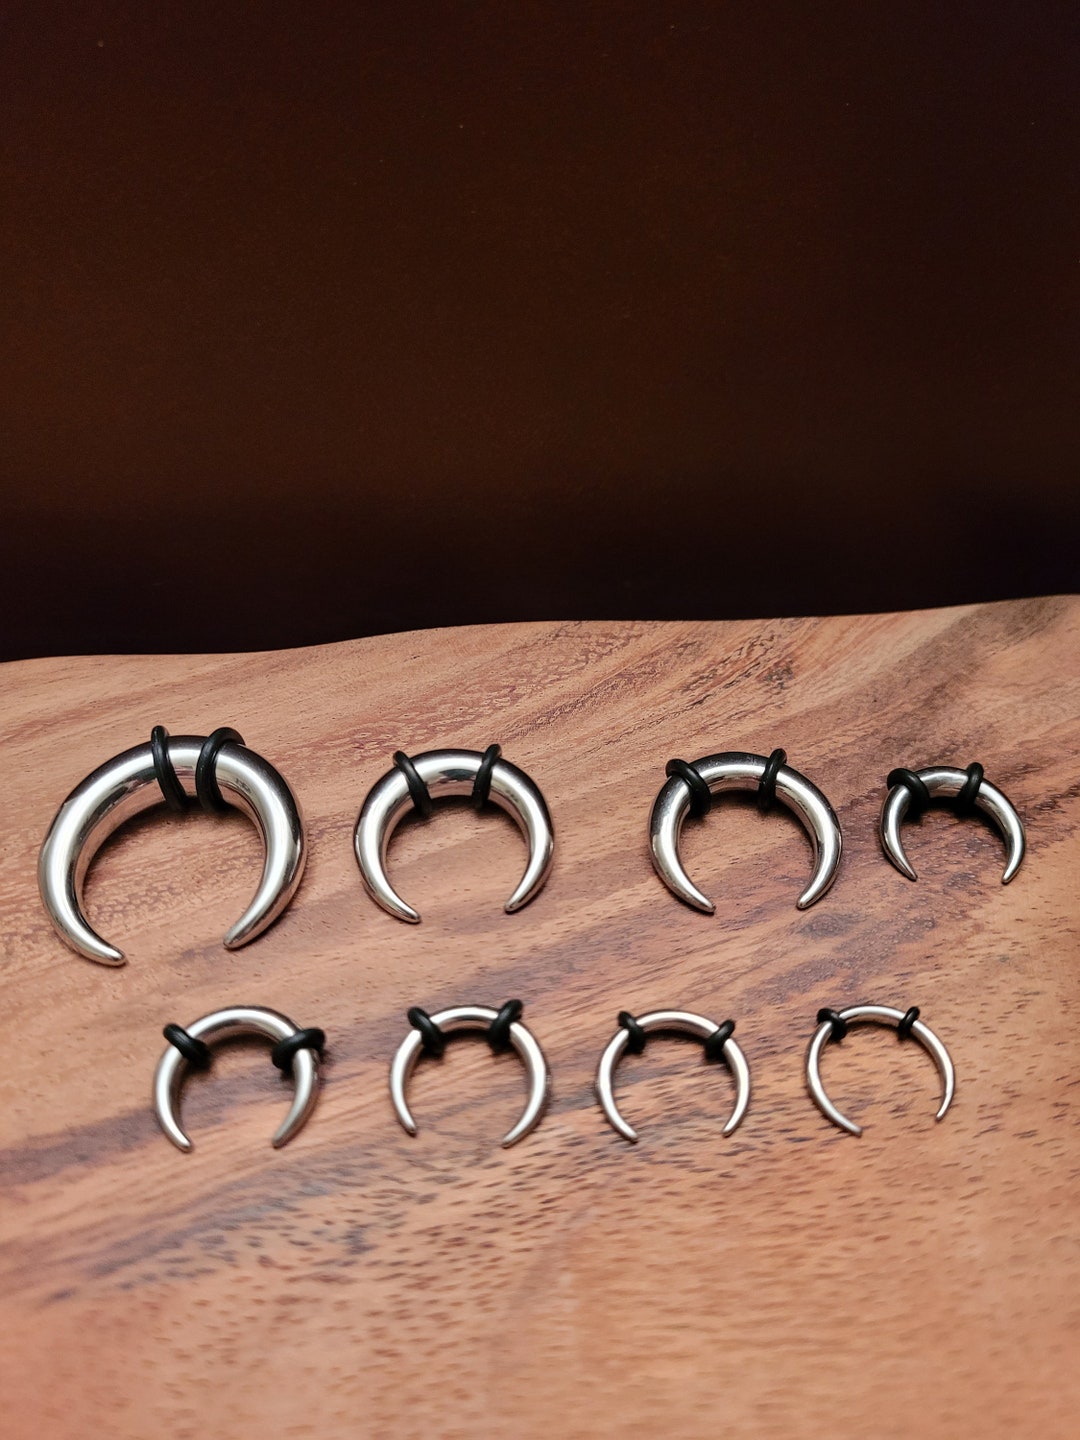 6 Steel Pinchers 0g 2g 4g 6g 8g 10g Horseshoes Talons Tapers